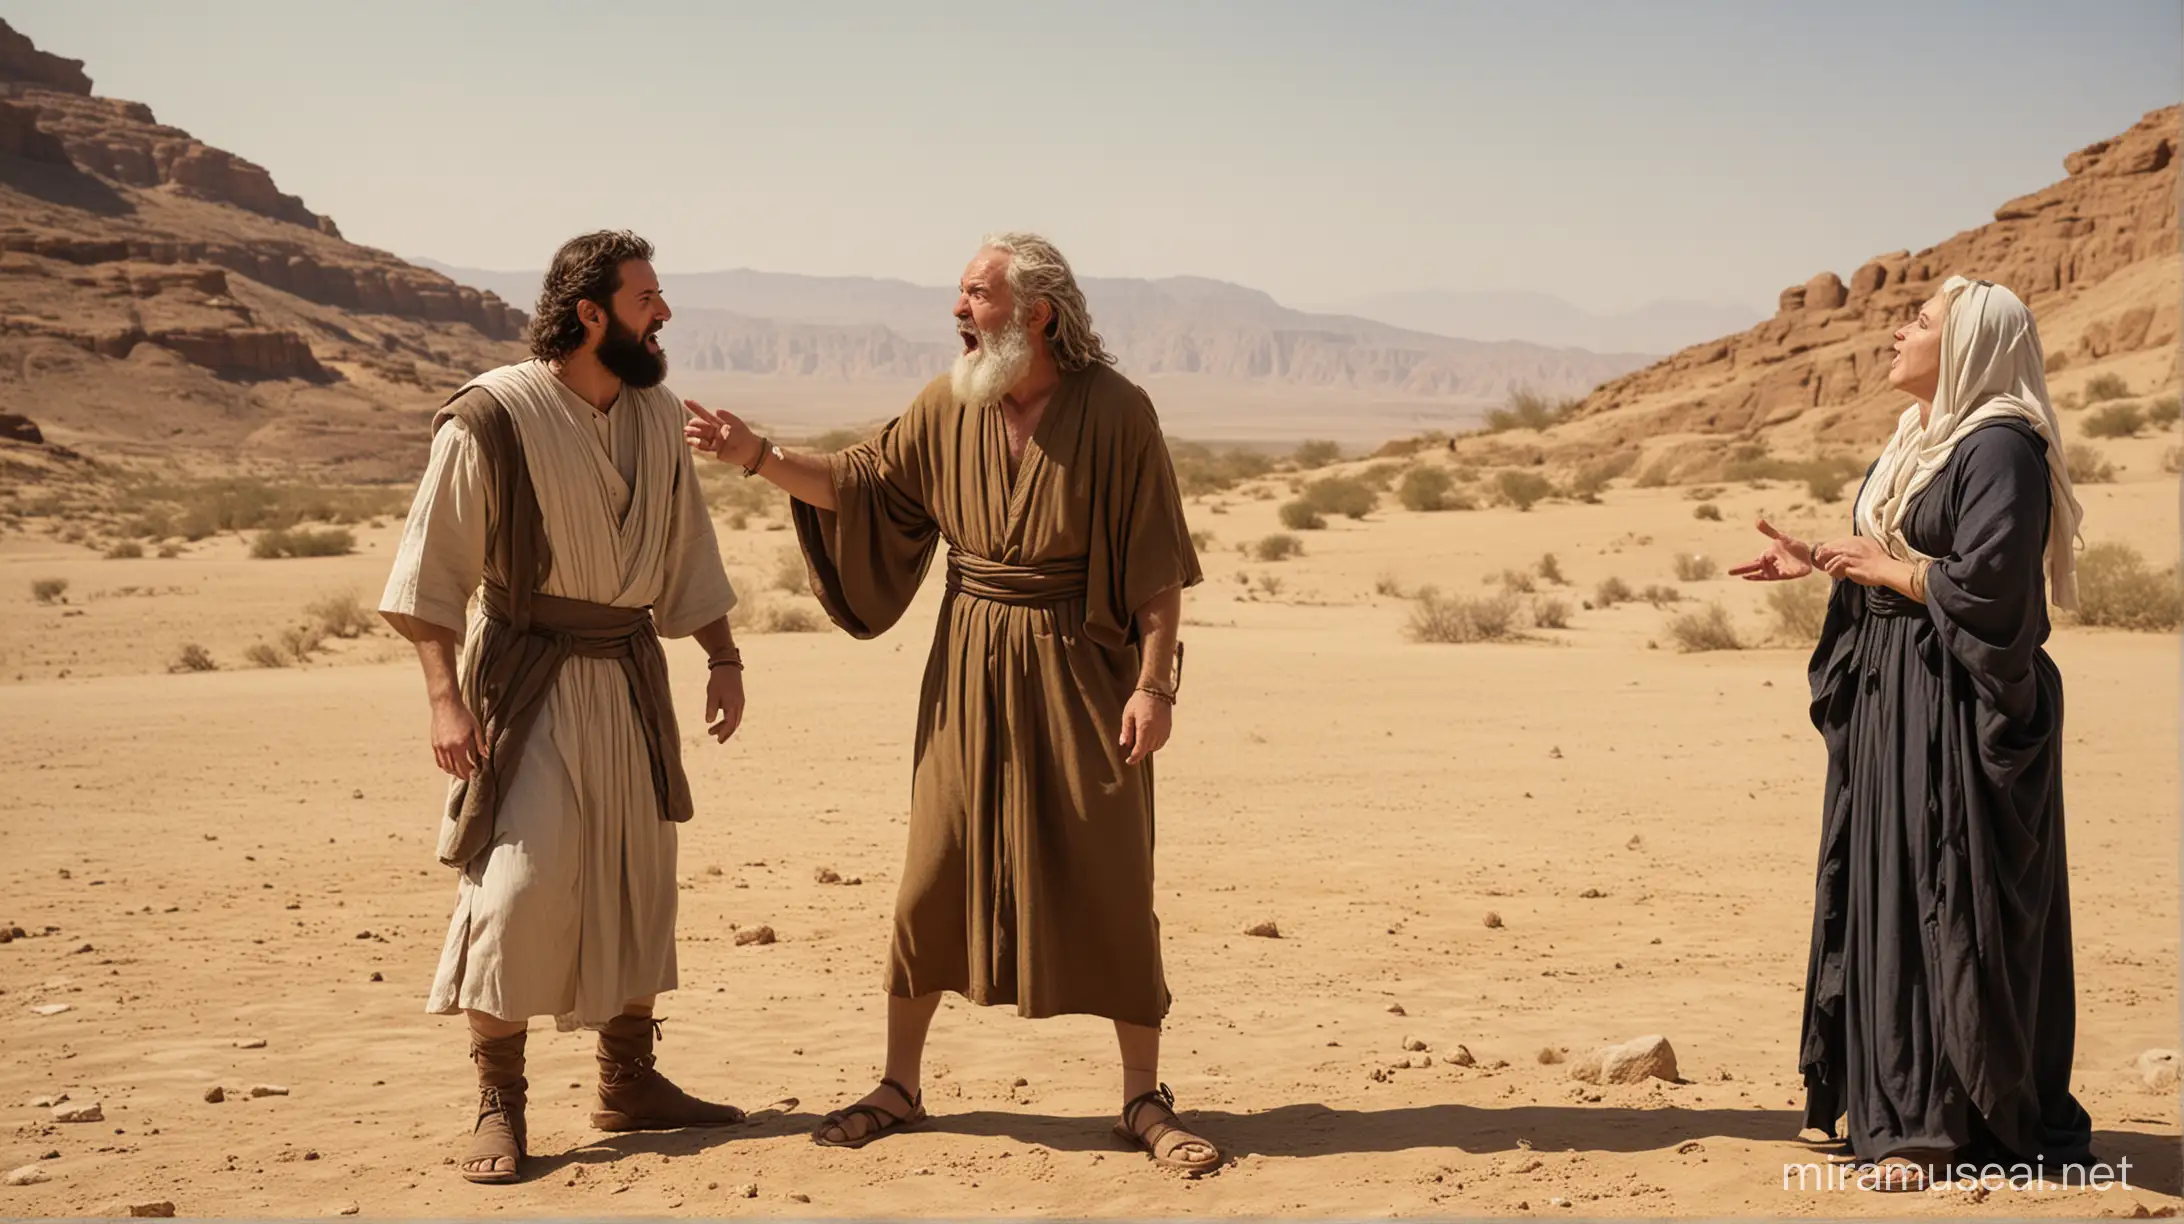 Aaron and his wife arguing in the desert with Moses , in the era of Moses